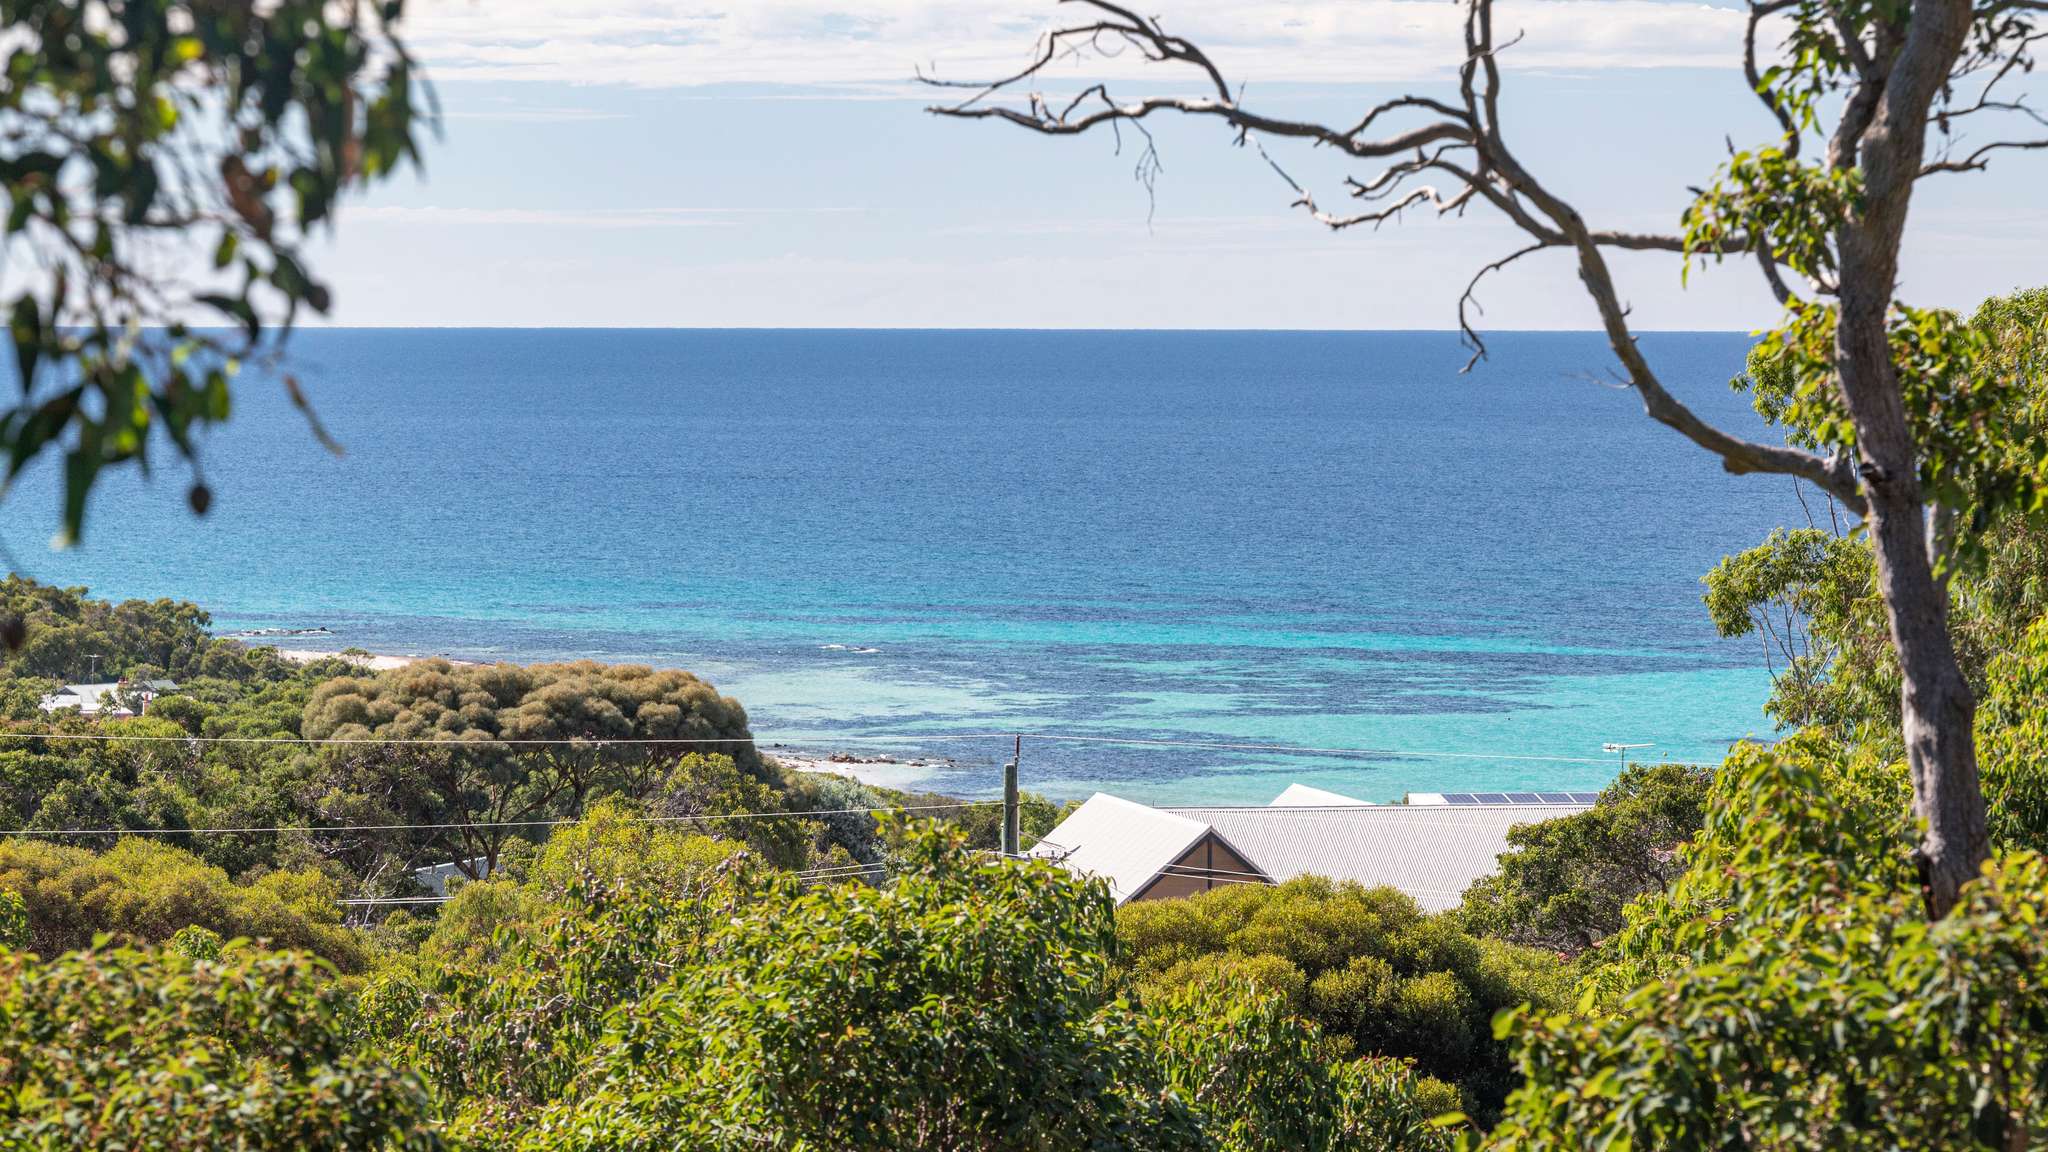 View of the Indian Ocean and turquoise blue waters through trees and bushes in Eagle Bay, WA